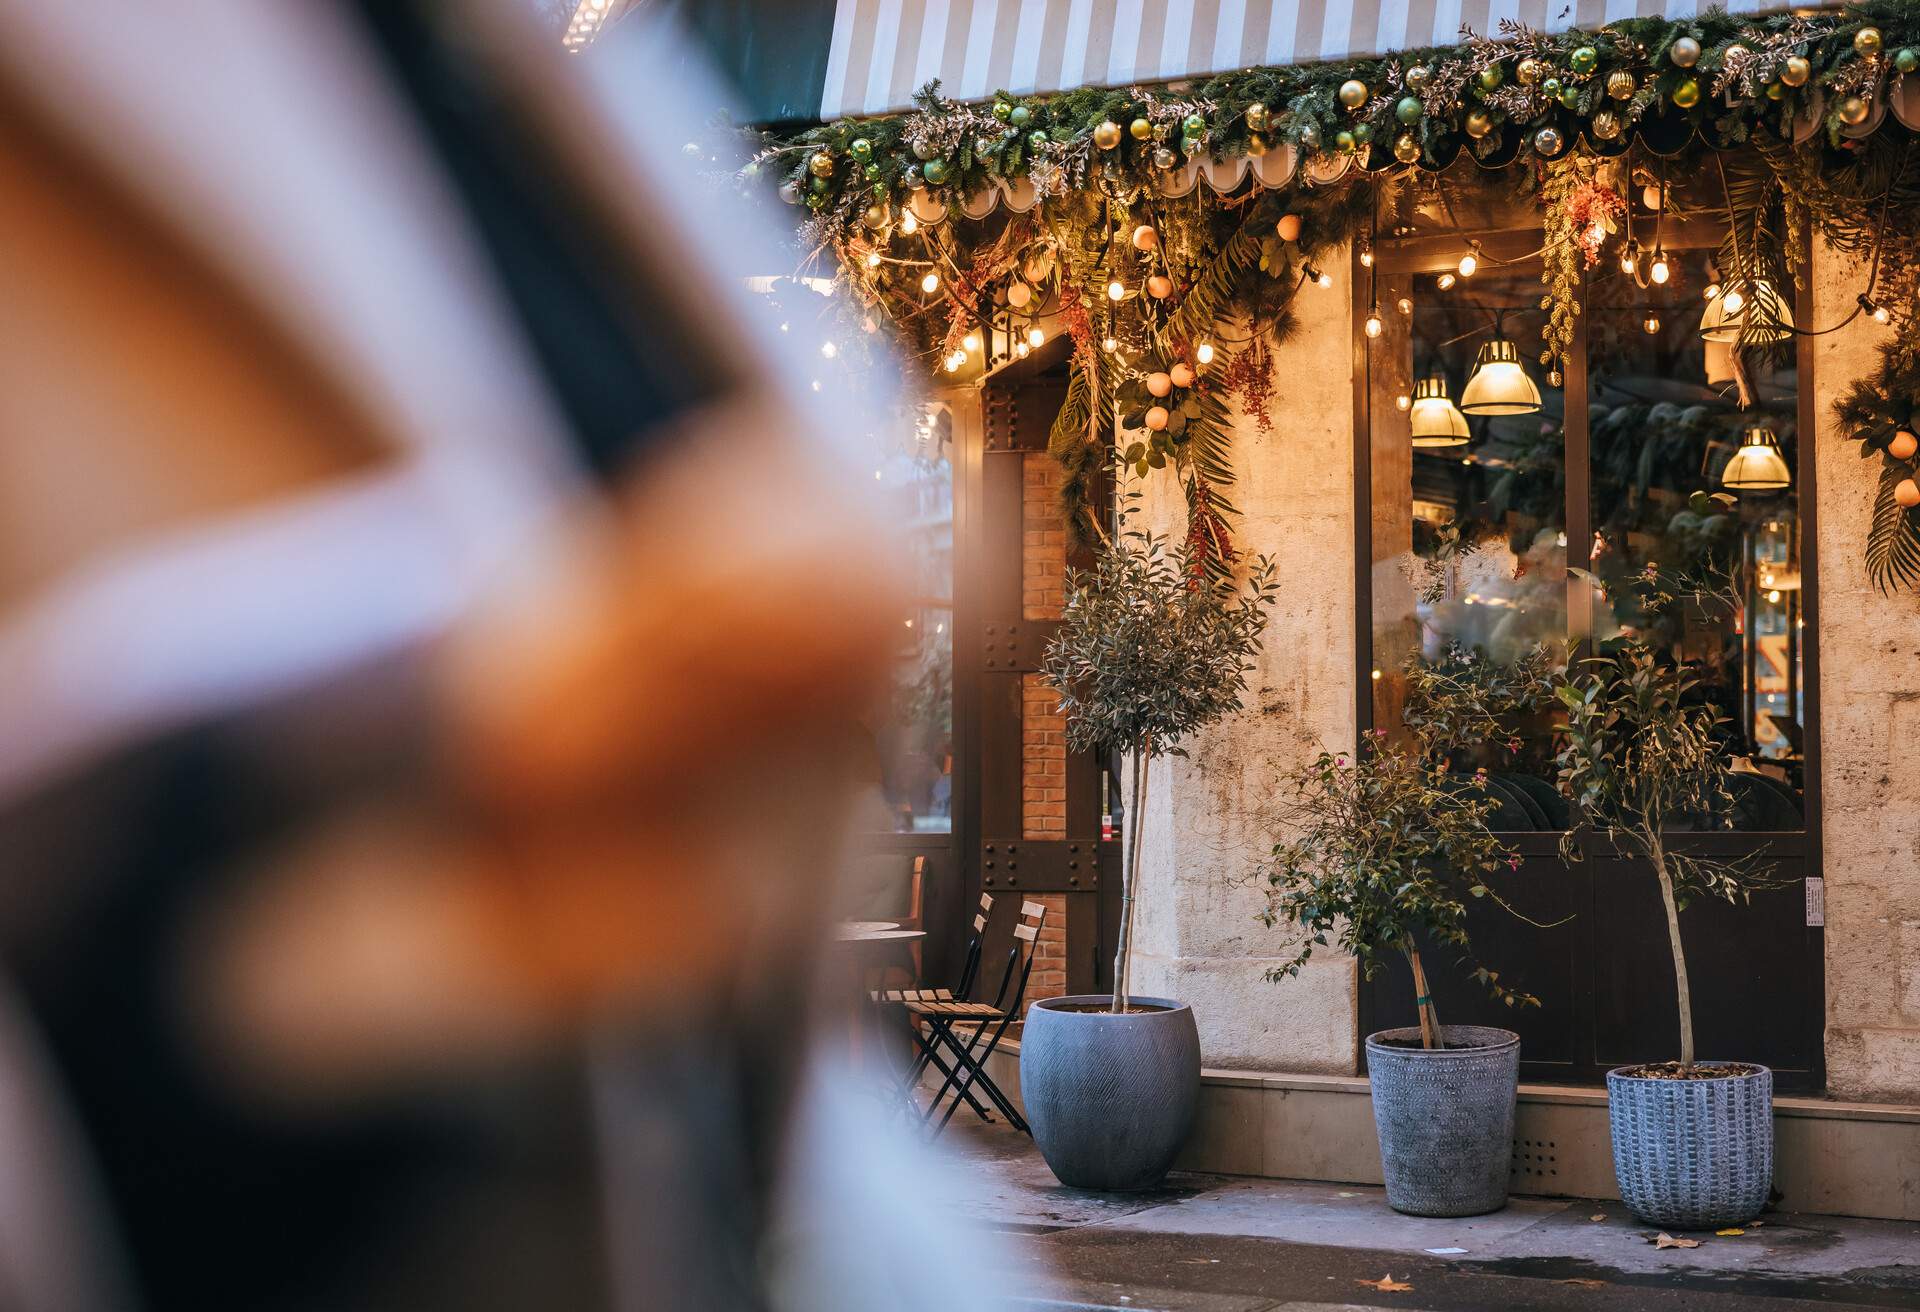 Close-up fancy Italian restaurant in the evening with Christmas decoration and lights at the top of the restaurant window, Pizza sign, plants standing in front of the Restaurant, Paris, woman with two baguettes in the forefront, focus on background, horizontal